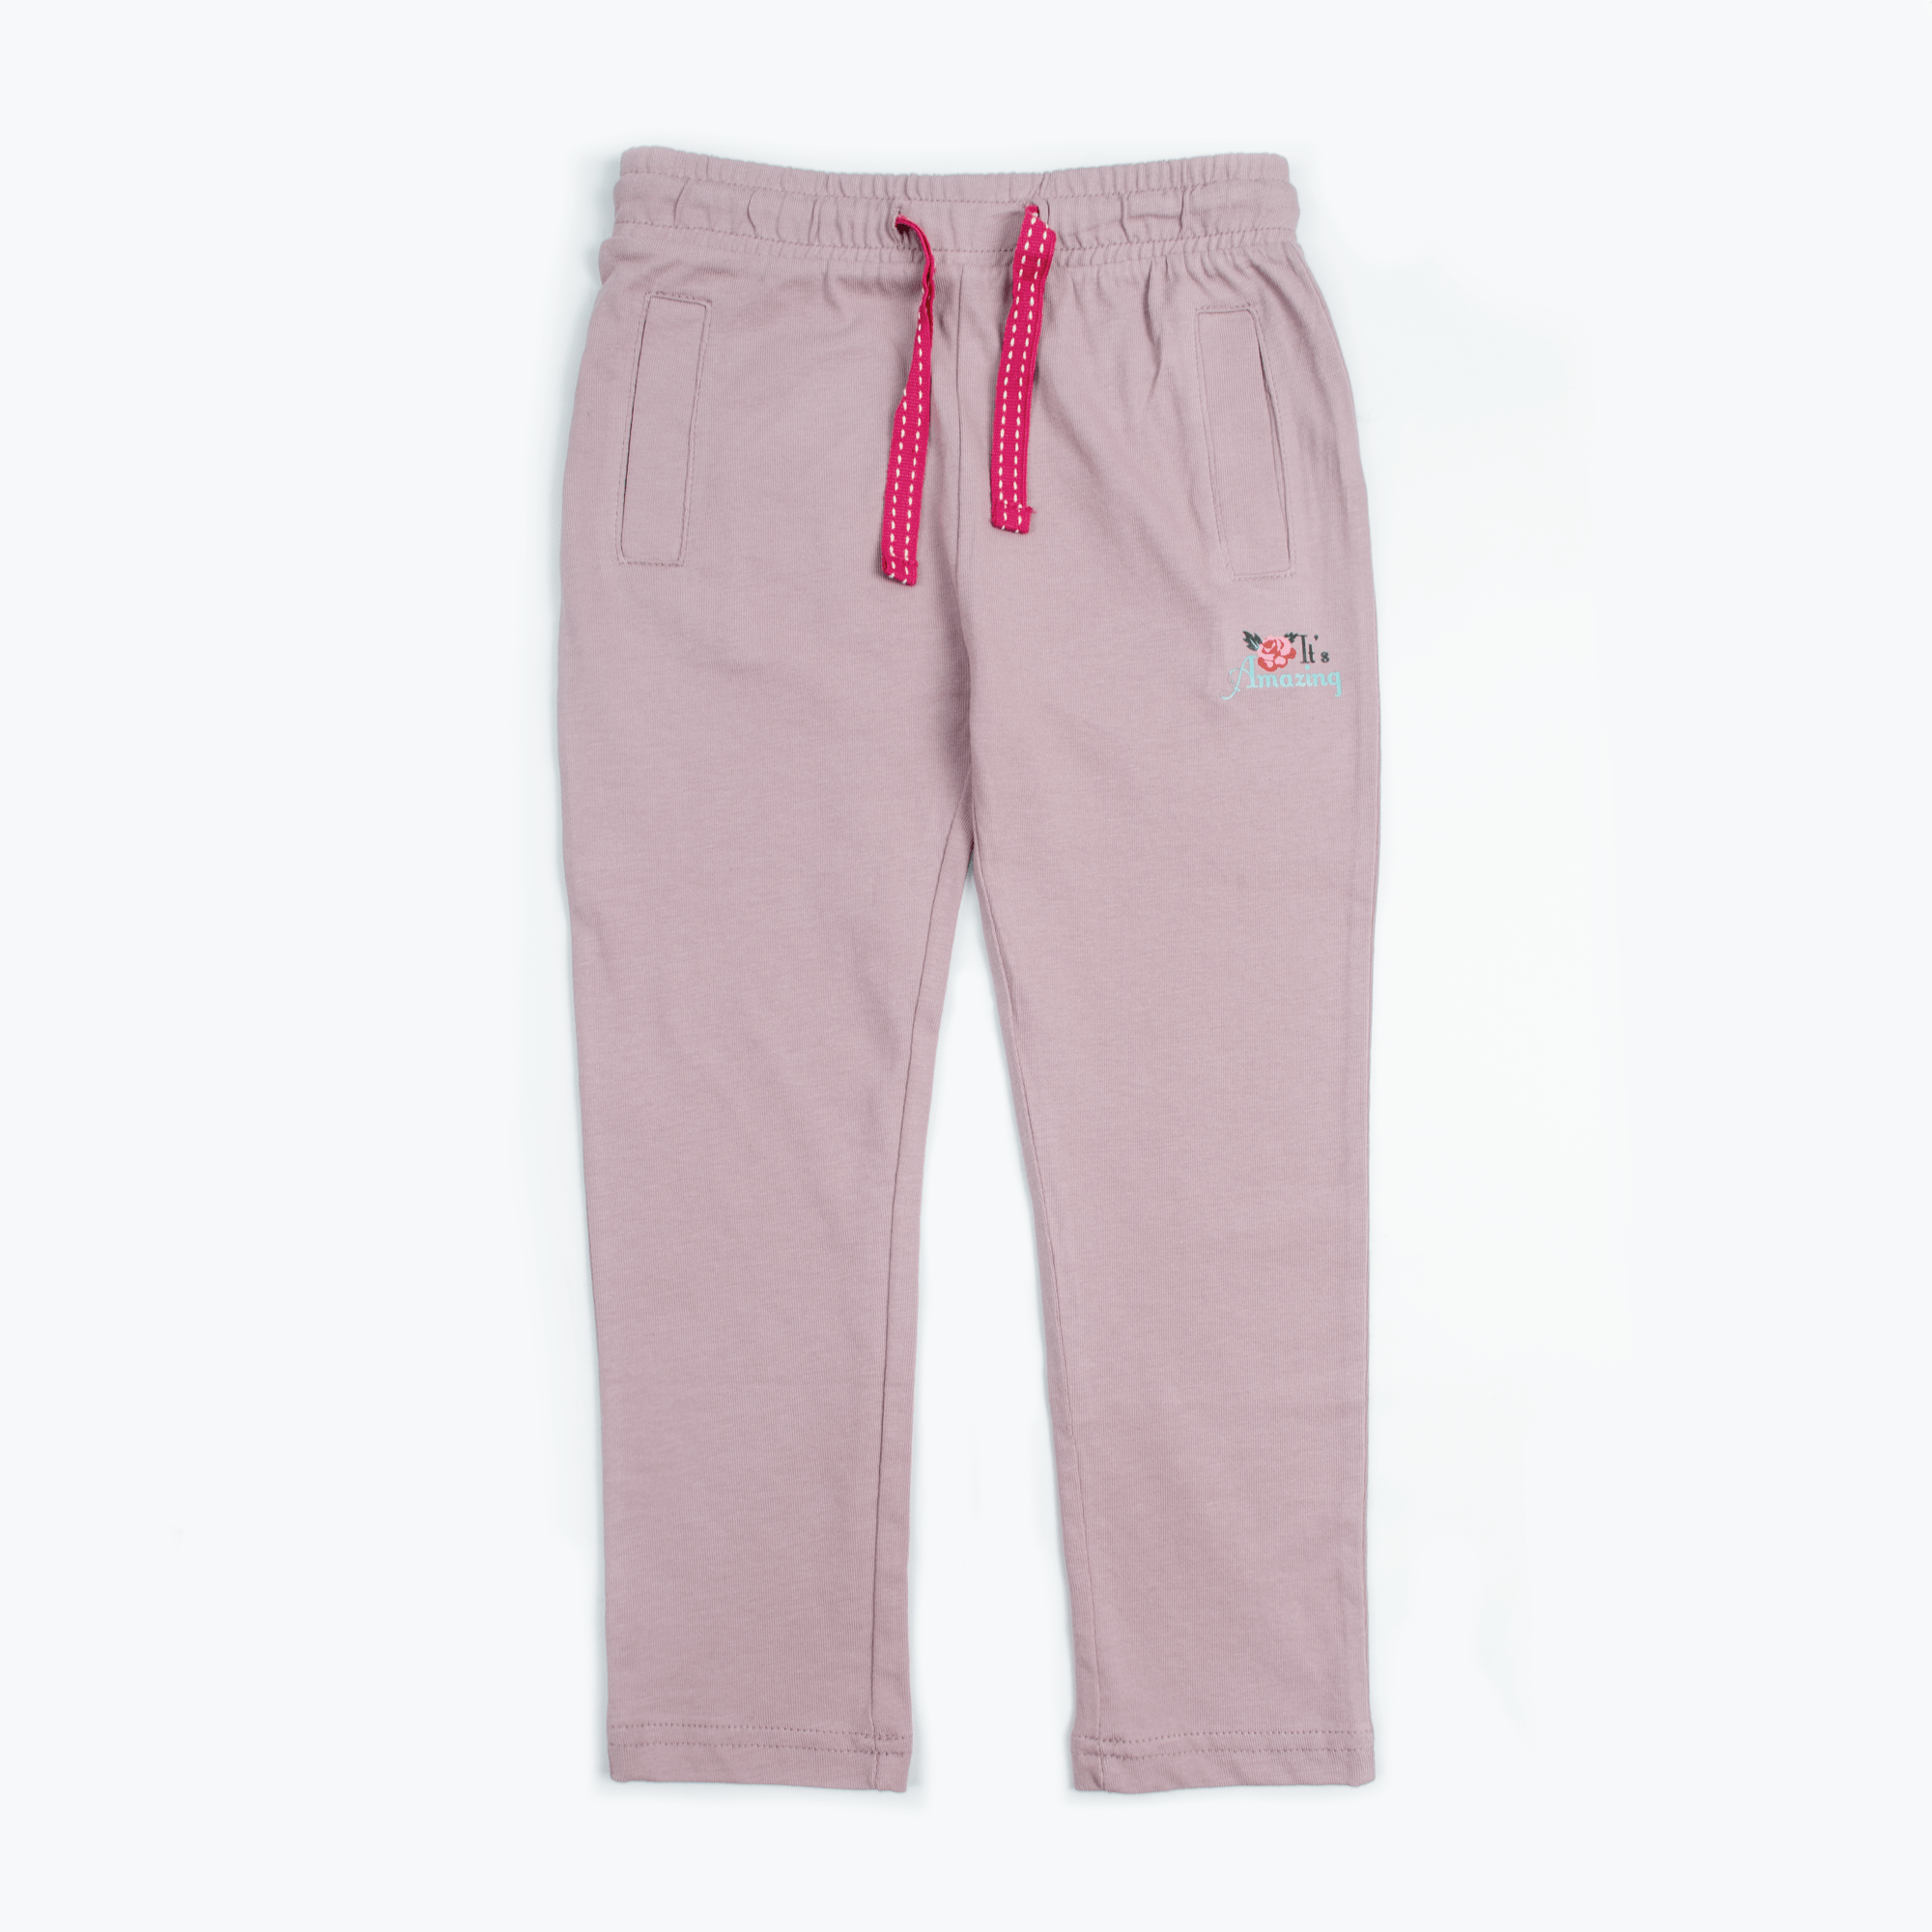 Stone Harbor Girl's Jogger Lilac / 2-3 Y GIRL'S LILAC AMAZING JOGGER